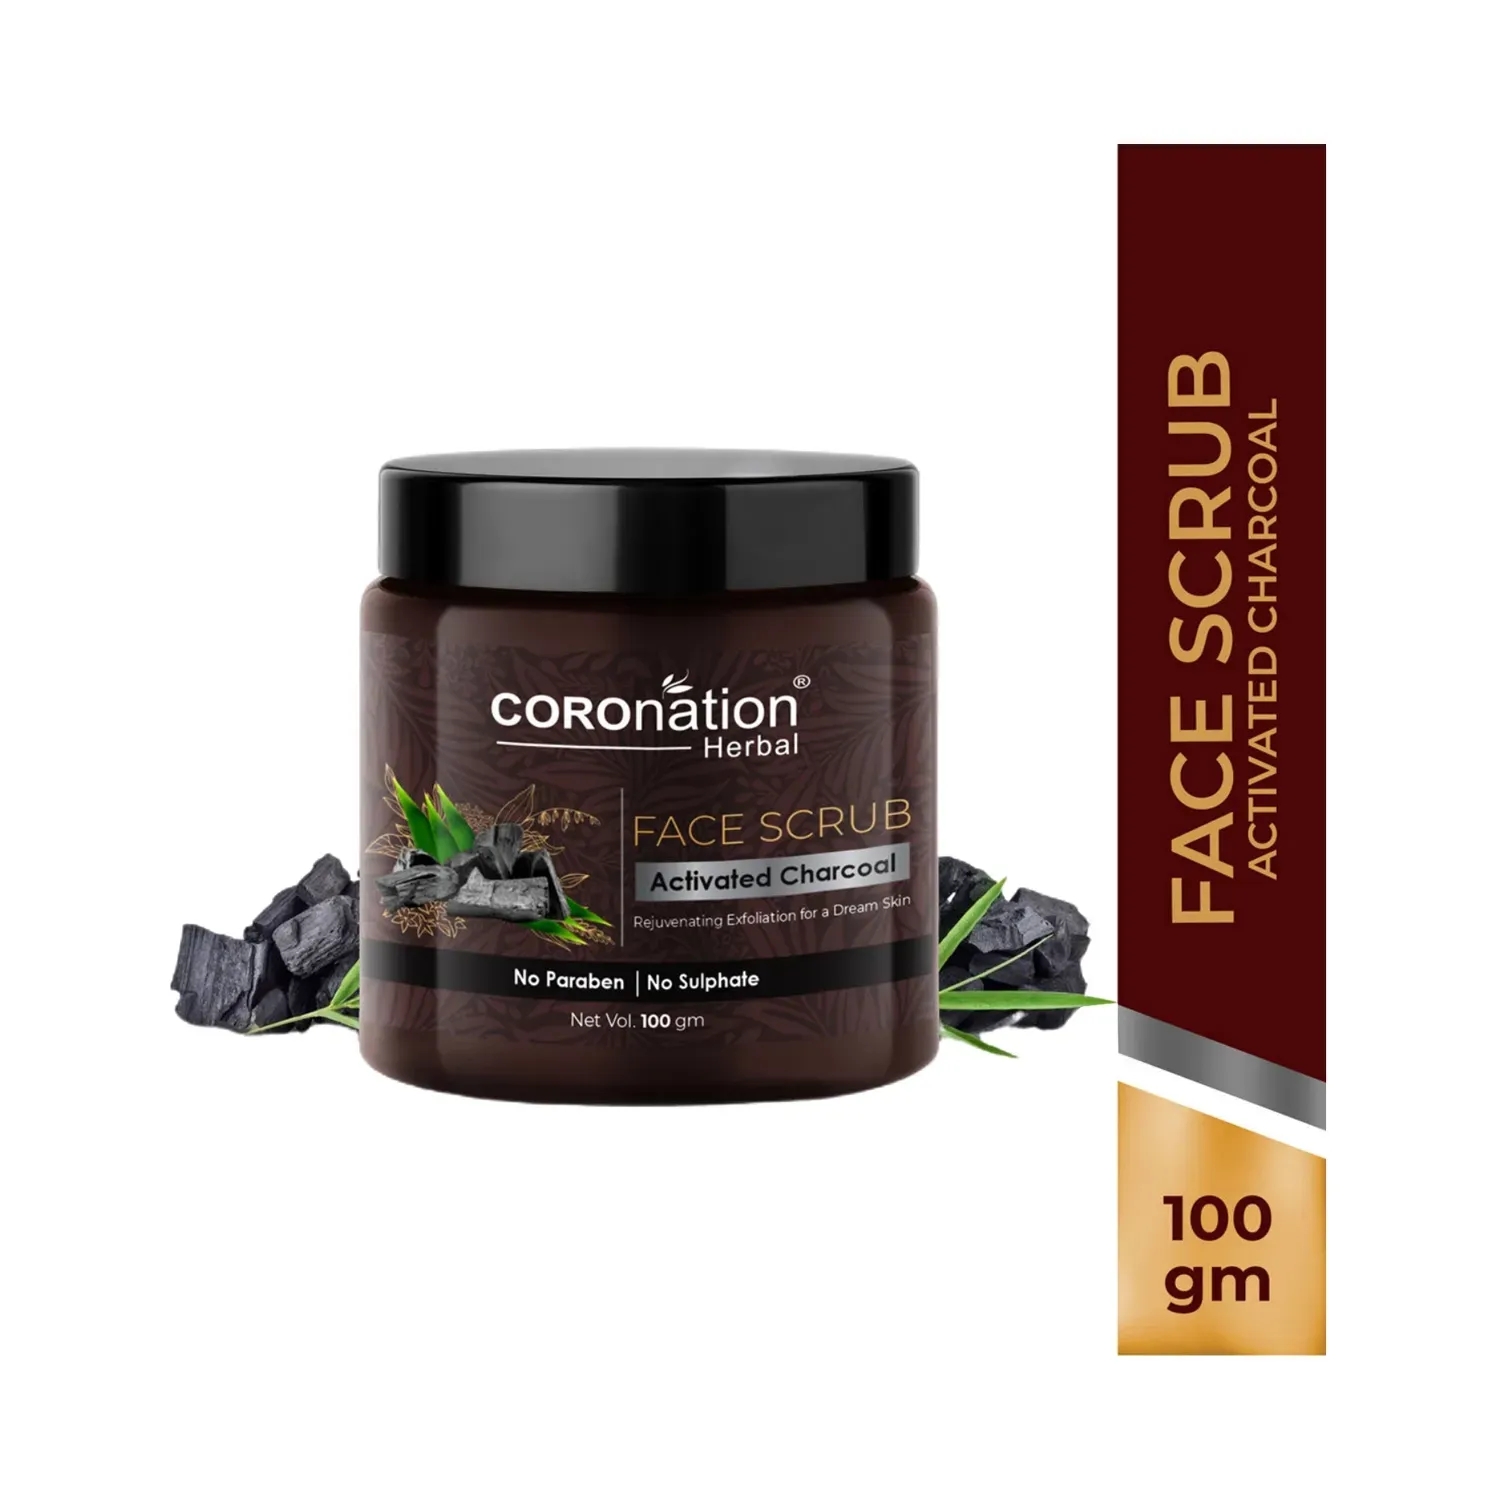 COROnation Herbal Activated Charcoal Face Scrub (100g)